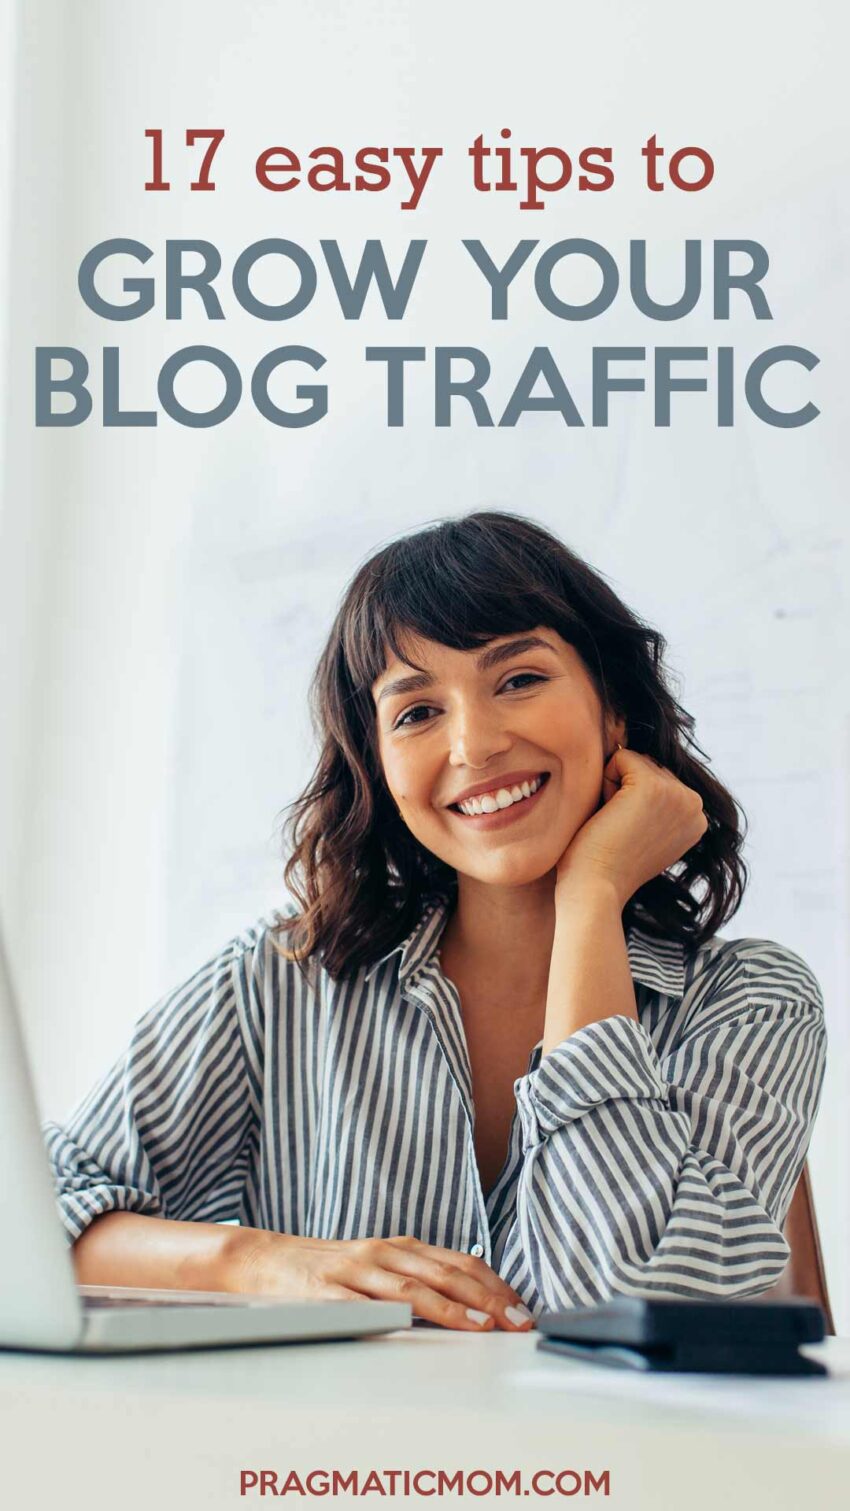 17 Easy Tips to Grow Your Blog Traffic